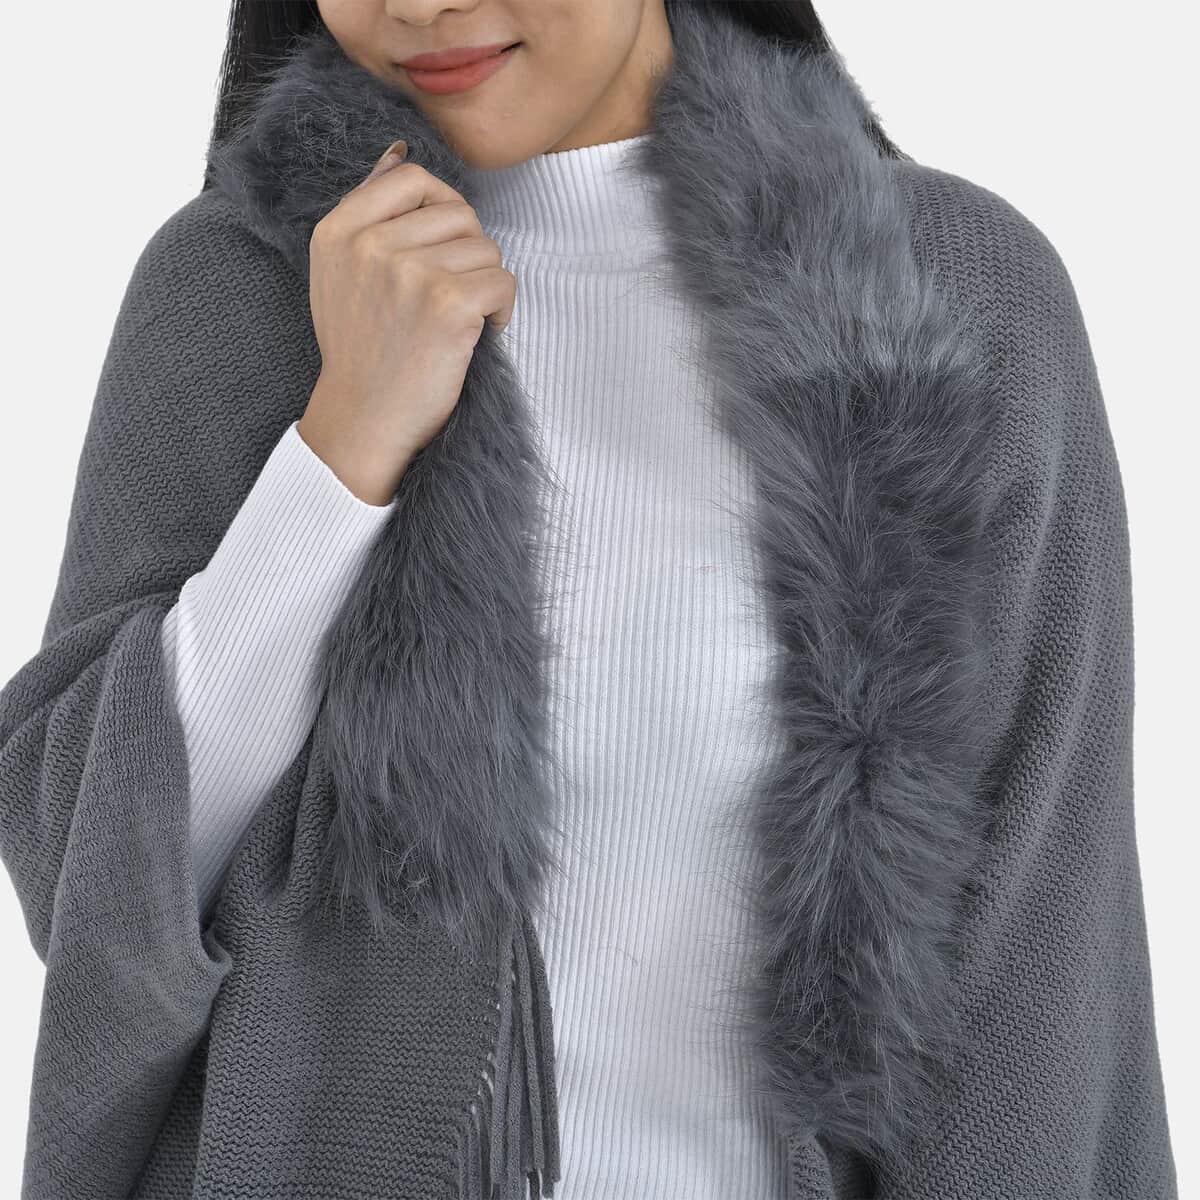 Tamsy Charcoal Trendy and Luxurious Faux Fur Trimmed Kimono with Fringes - One Size Fits Most image number 5